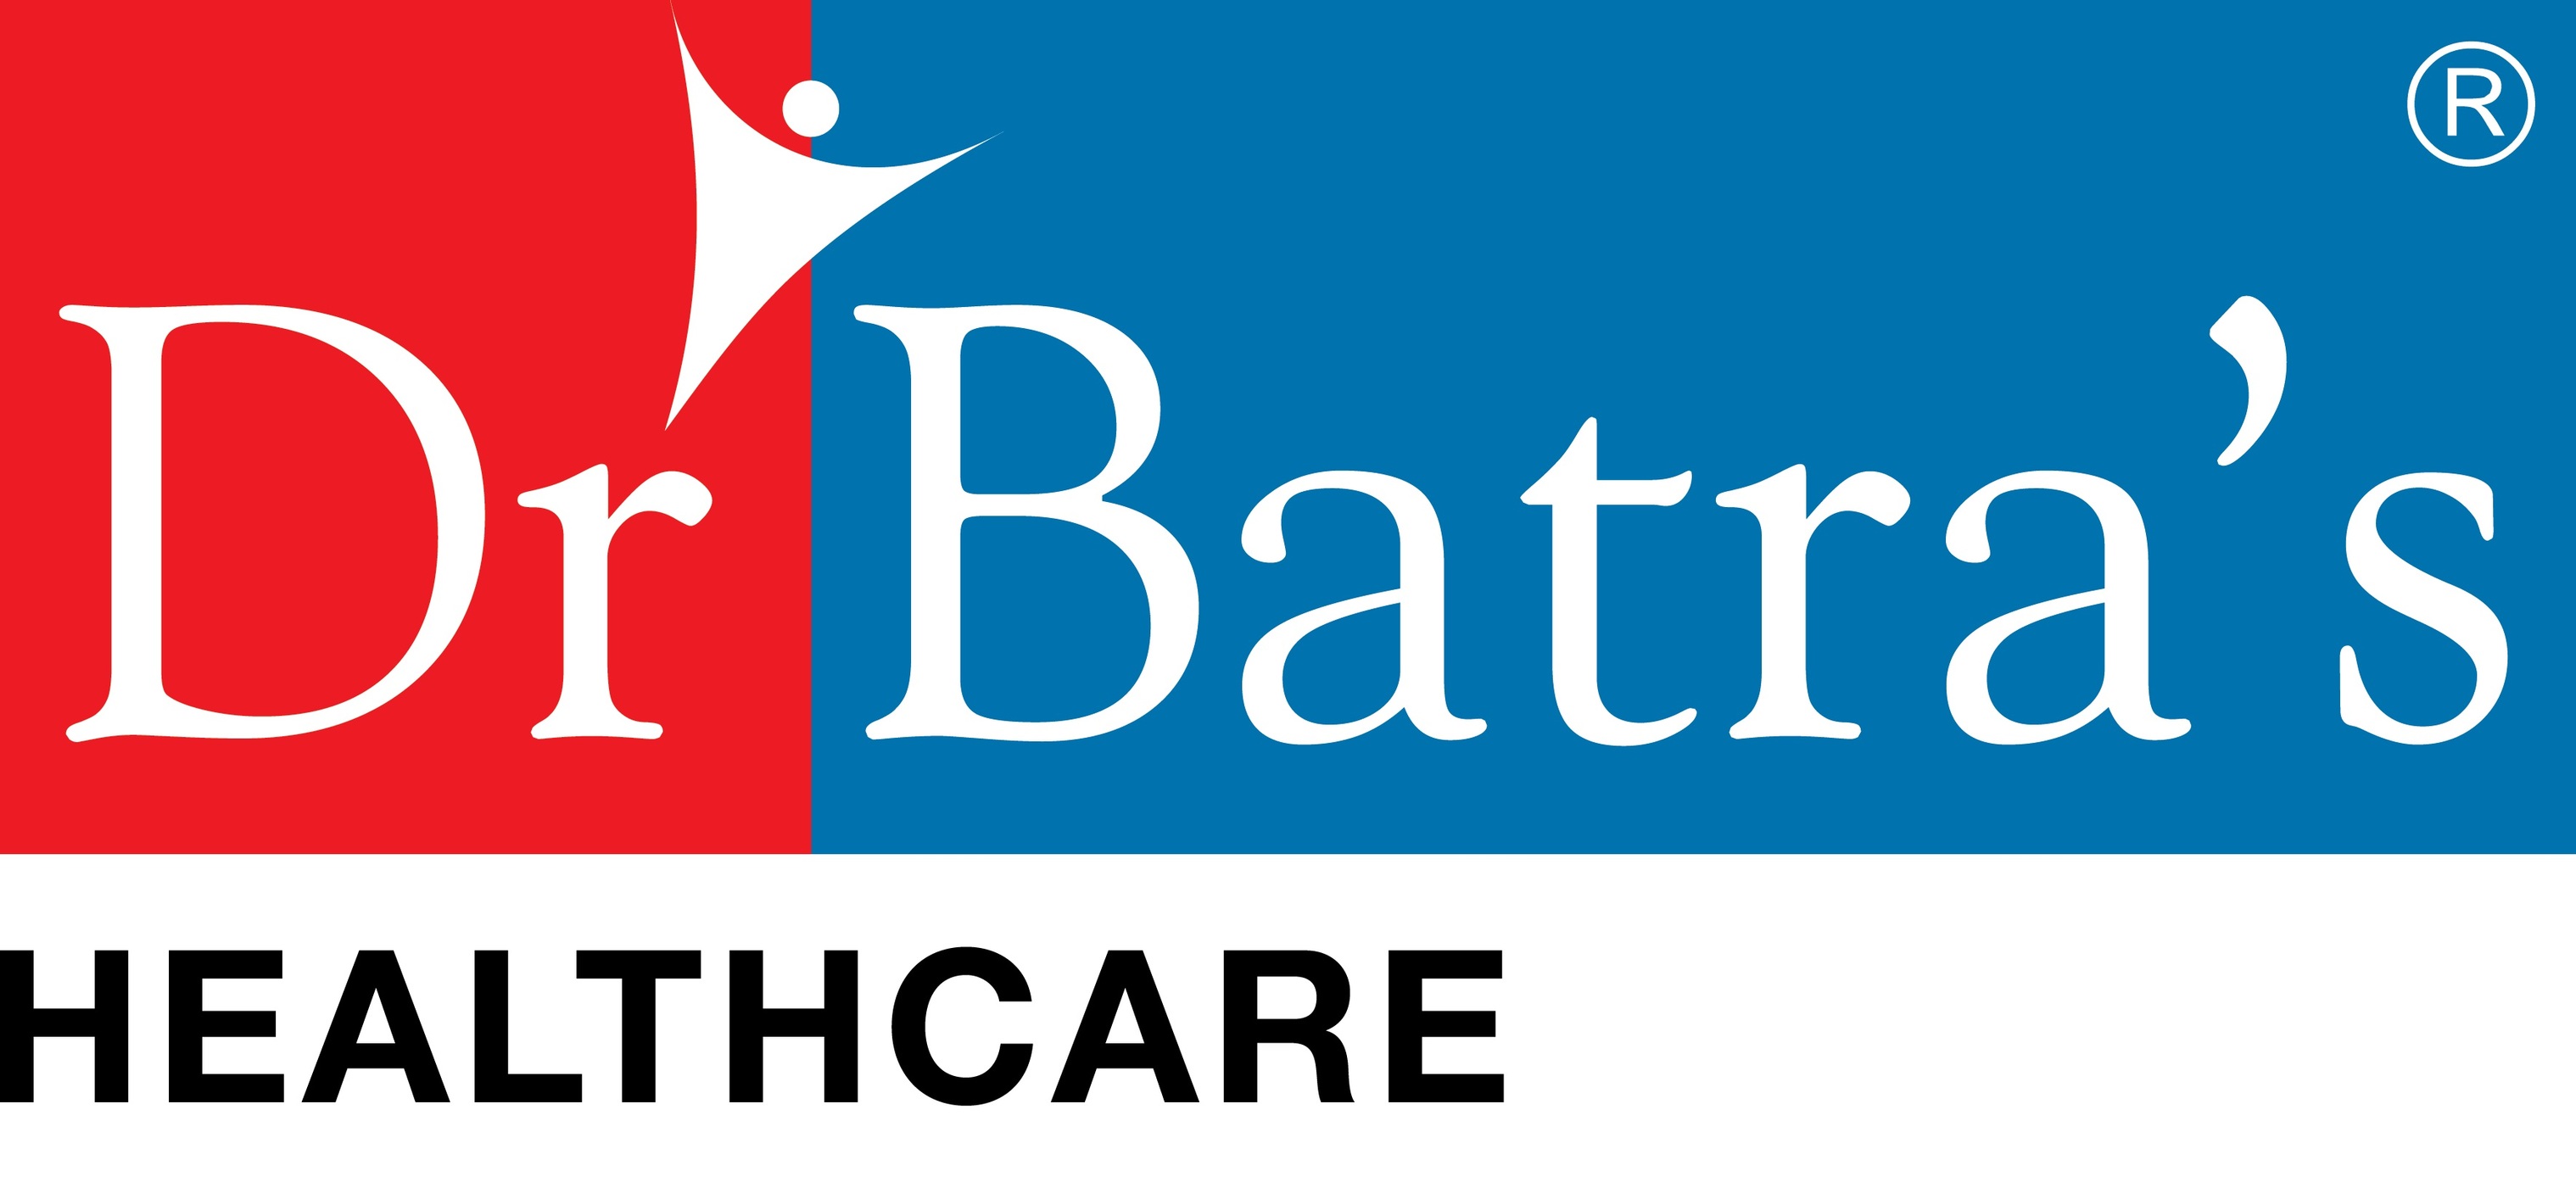 The Largest Chain of Hair Clinics, Dr Batra's Celebrates Hair Loss  Awareness Month